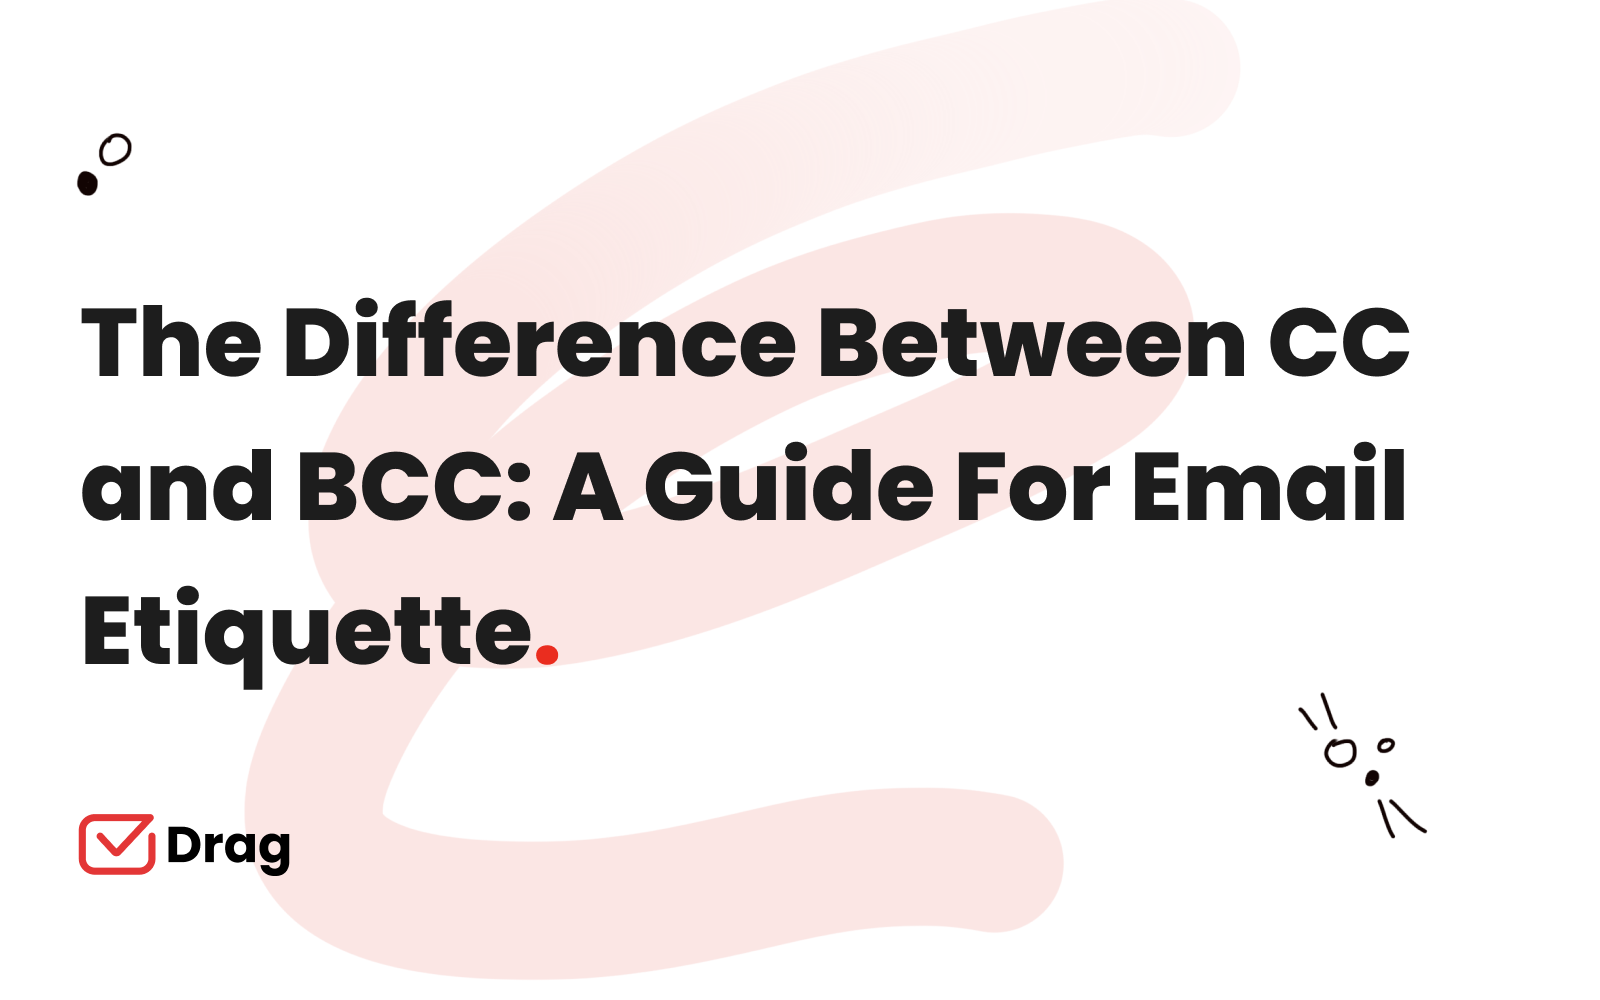 Are You CCing What I'm CCing?: A Guide to Work Email Etiquette